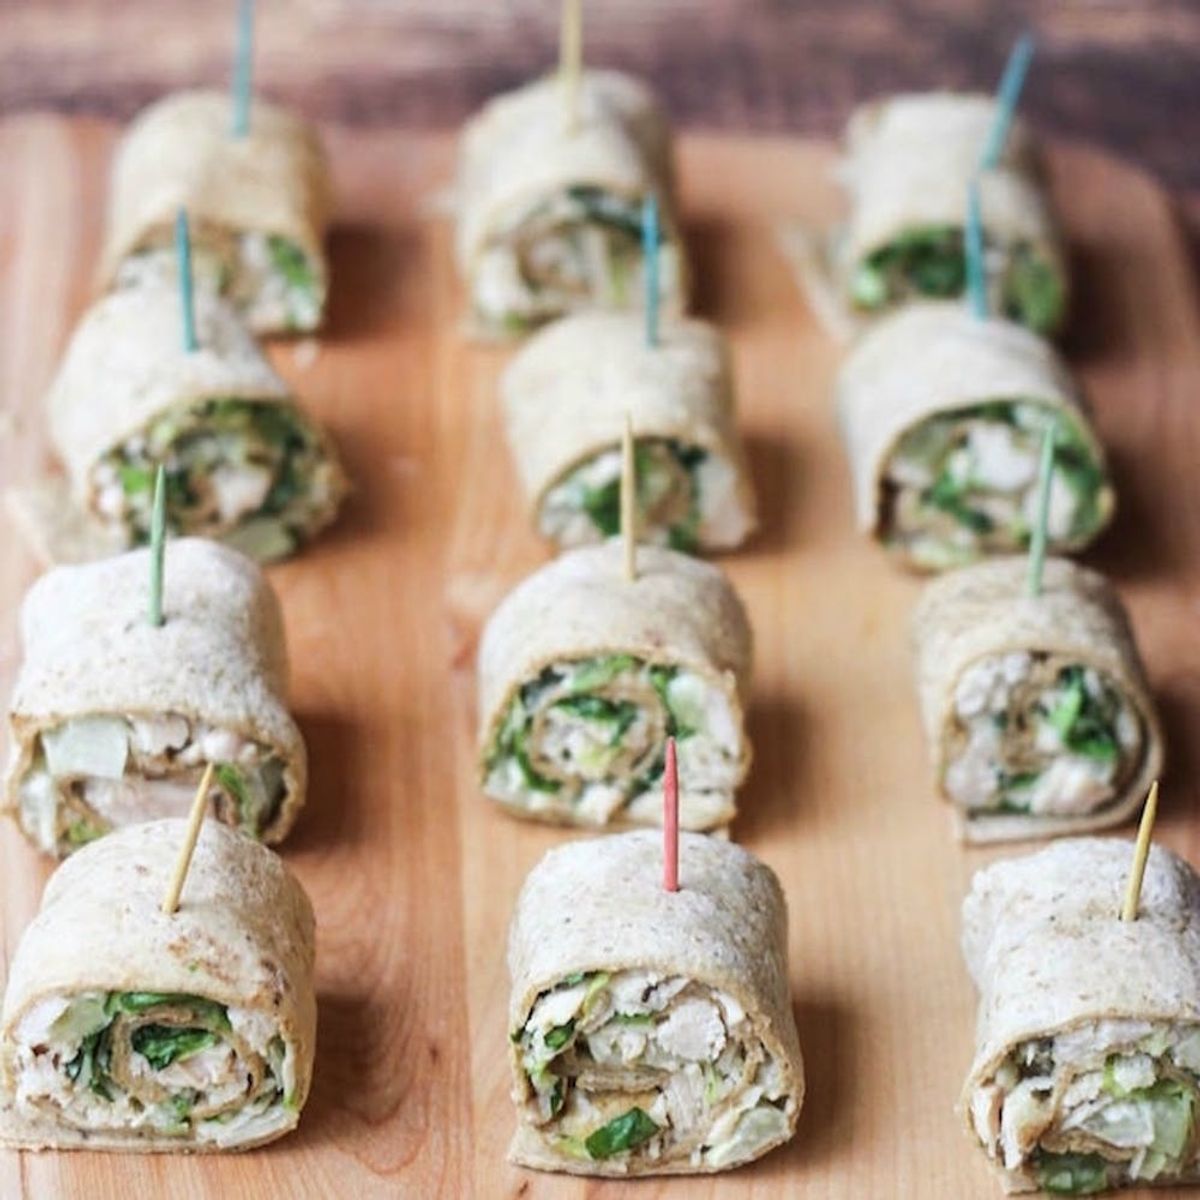 Mini wraps are one of the best finger food ideas for parties